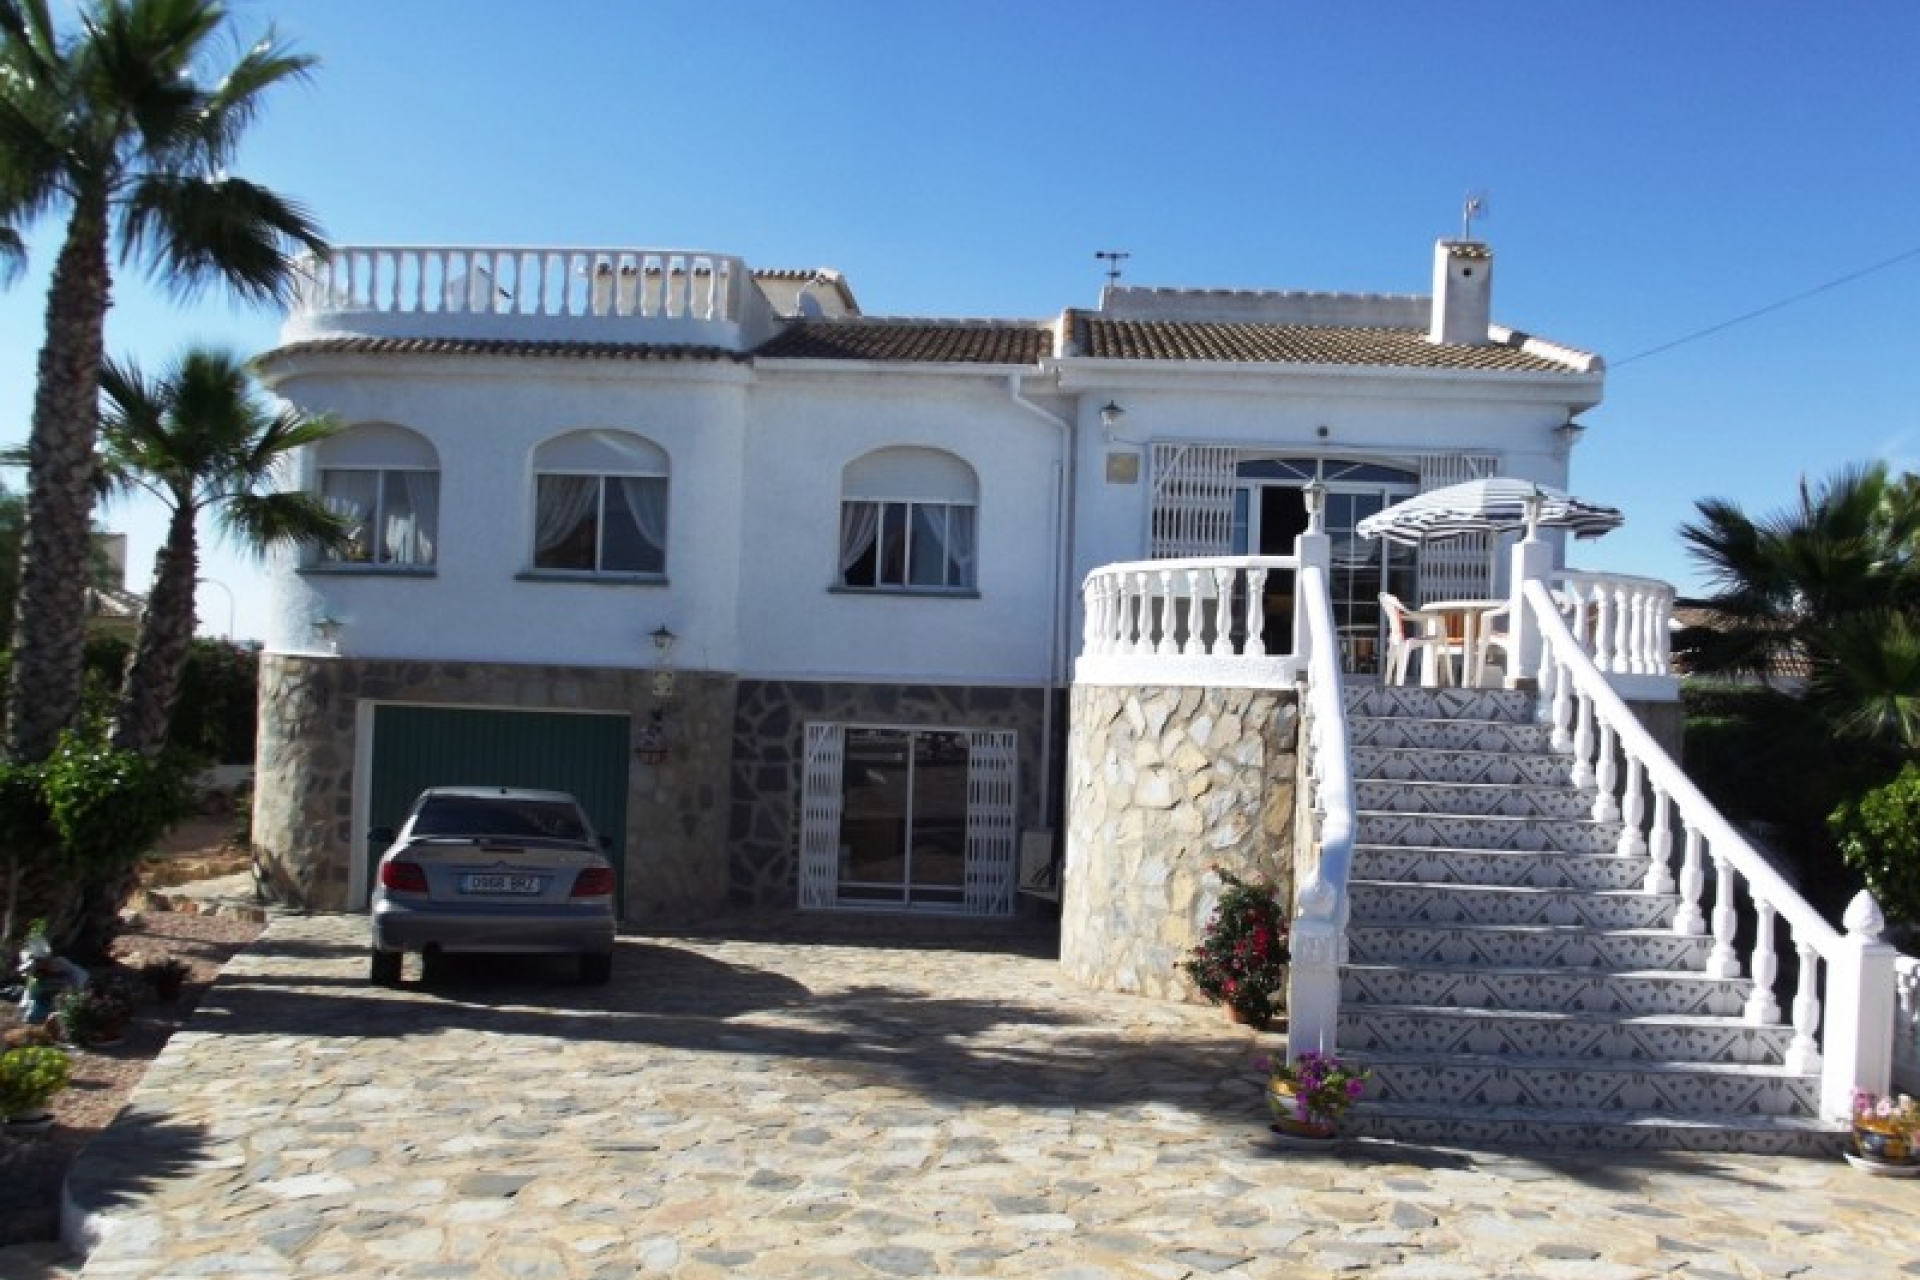 Cheap property for sale bargain Spain costa blanca